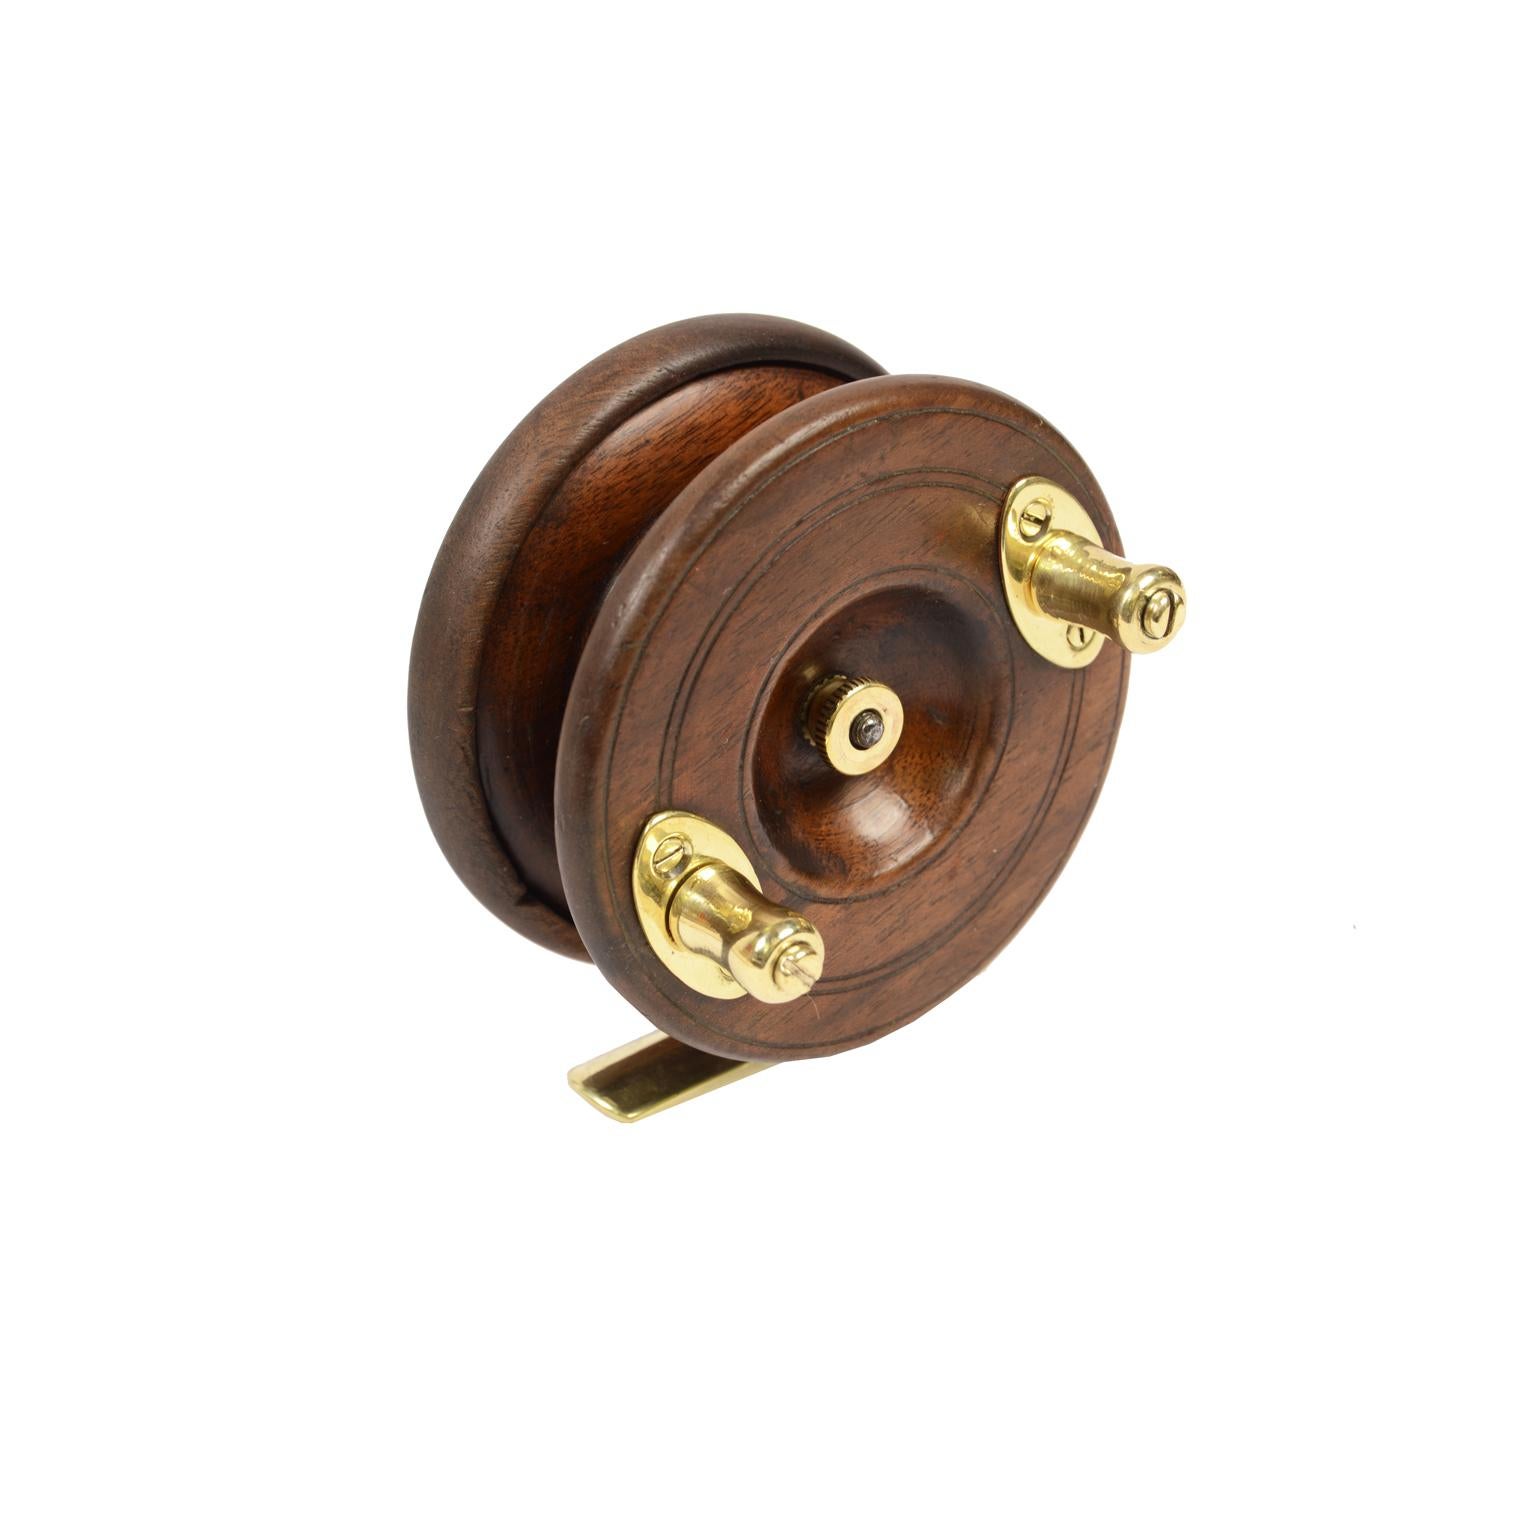 Fishing reel made of turned oak and brass, English manufacture of the early 1900s. Diameter 9 cm, thickness 4.5 cm.
Shipping insured by Lloyd's London; it is available our free gift box (look at the last picture).